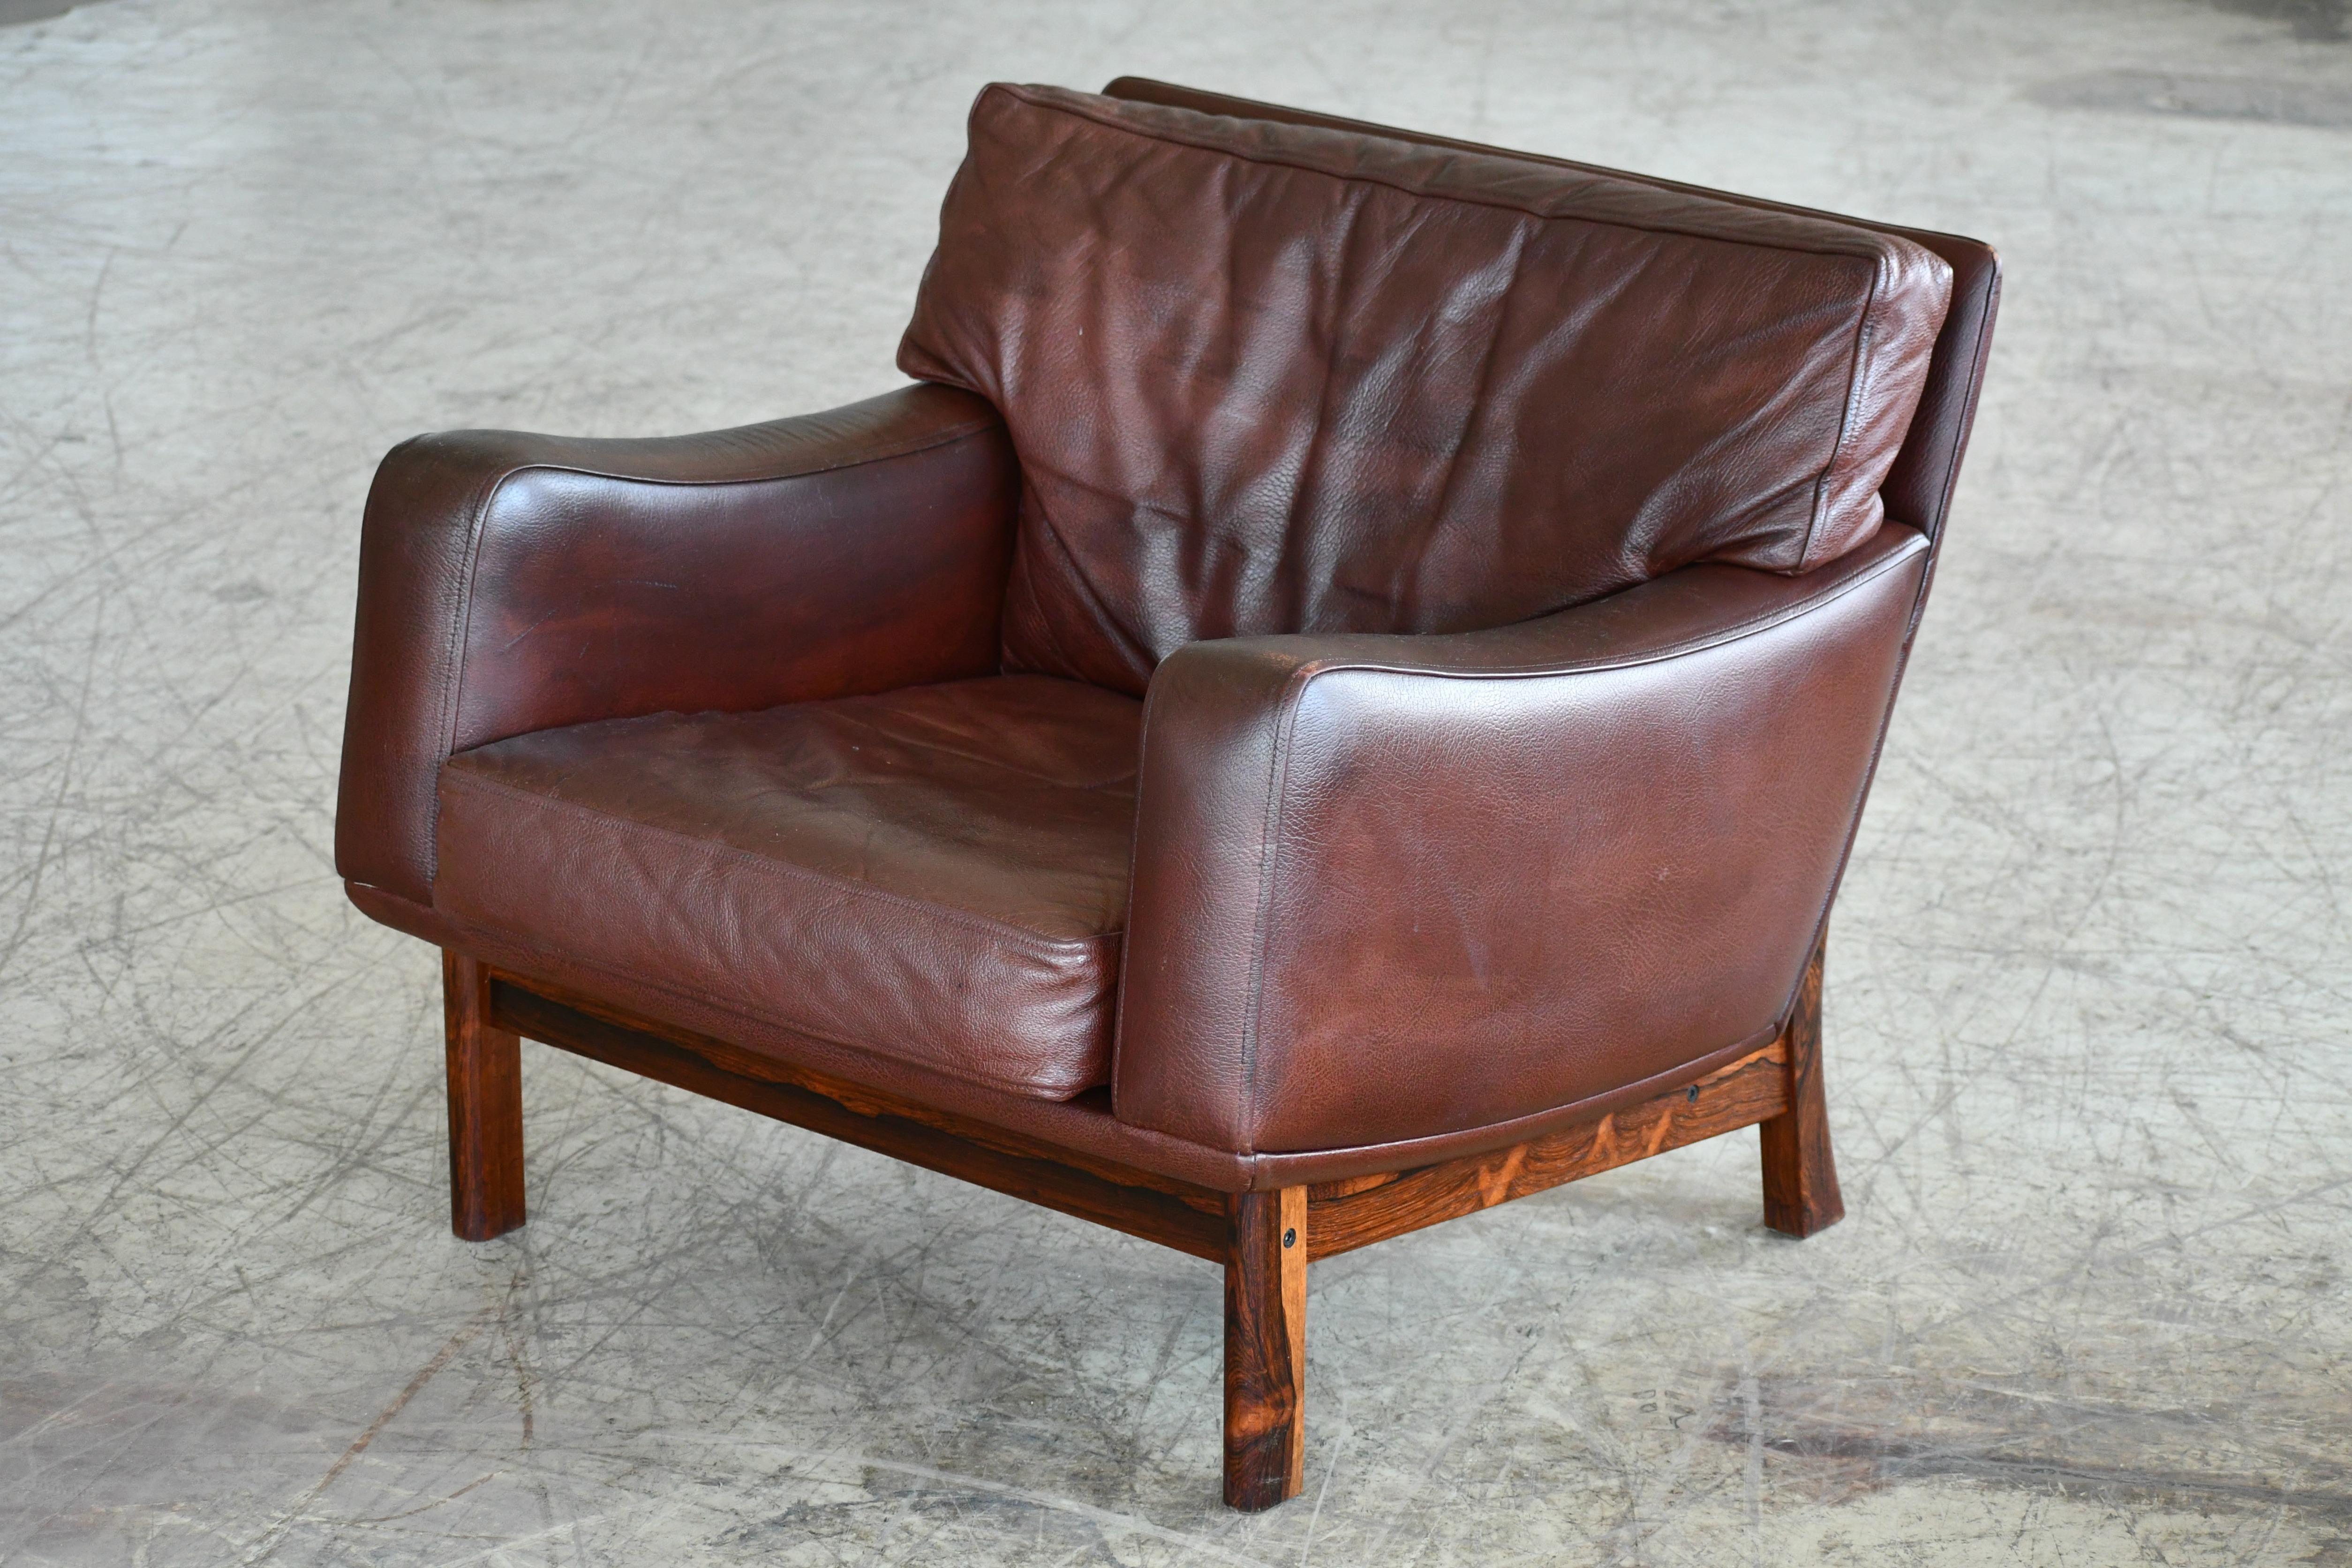 Fantastic Danish modern lounge chair designed and manufactured by Erhardsen & Andersen (Eran) in the late 1960s. The design is low and wide and epitomize Danish design of the late 1960s. High quality buffalo hide raised on a frame and legs carved of